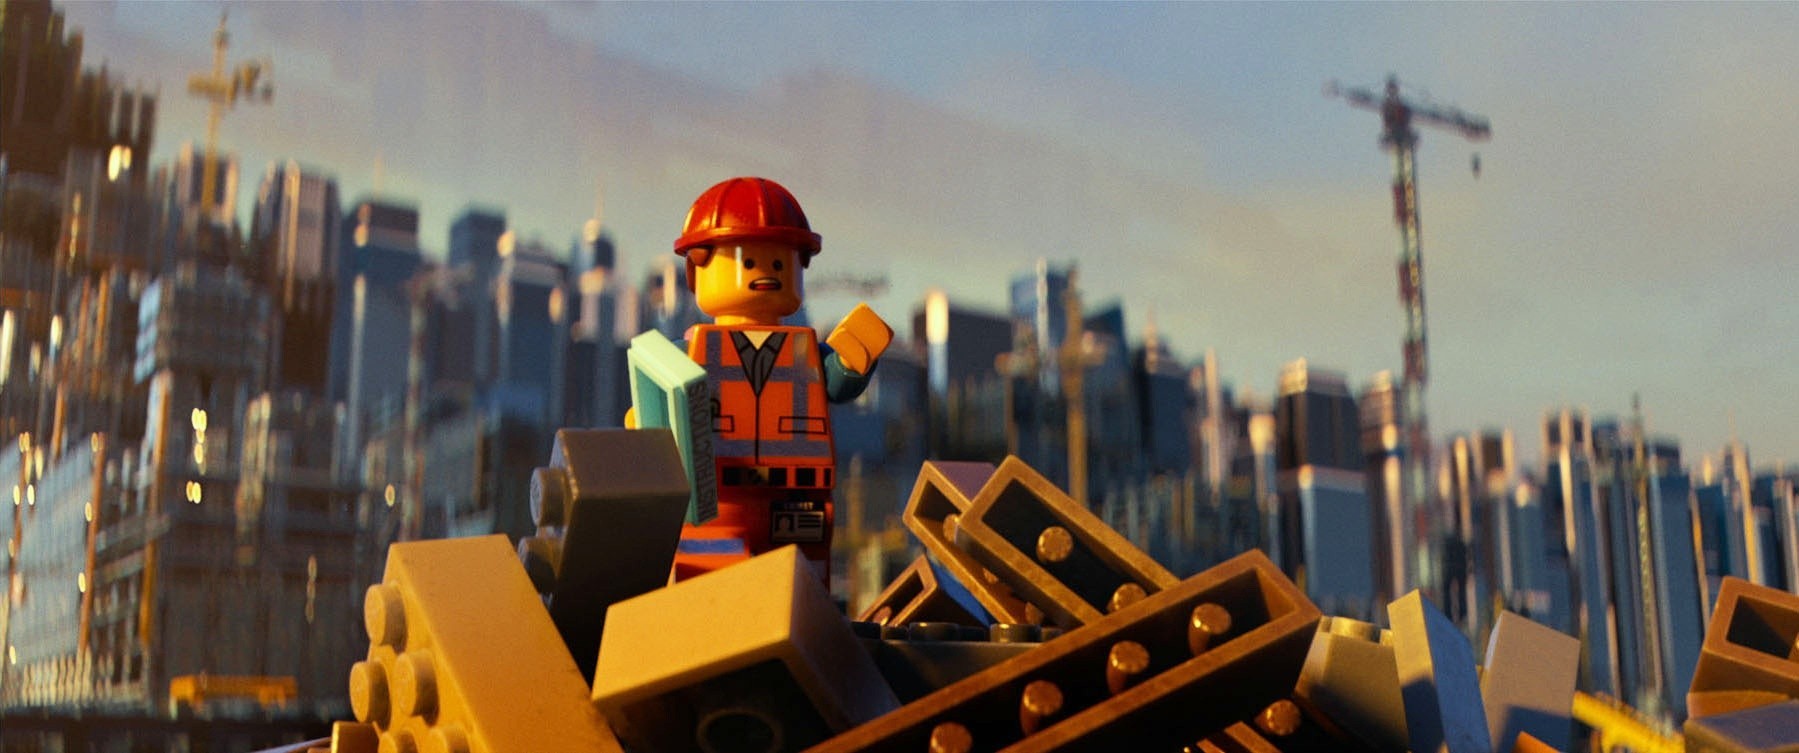 Emmet from Warner Bros. Pictures' The Lego Movie (2014)